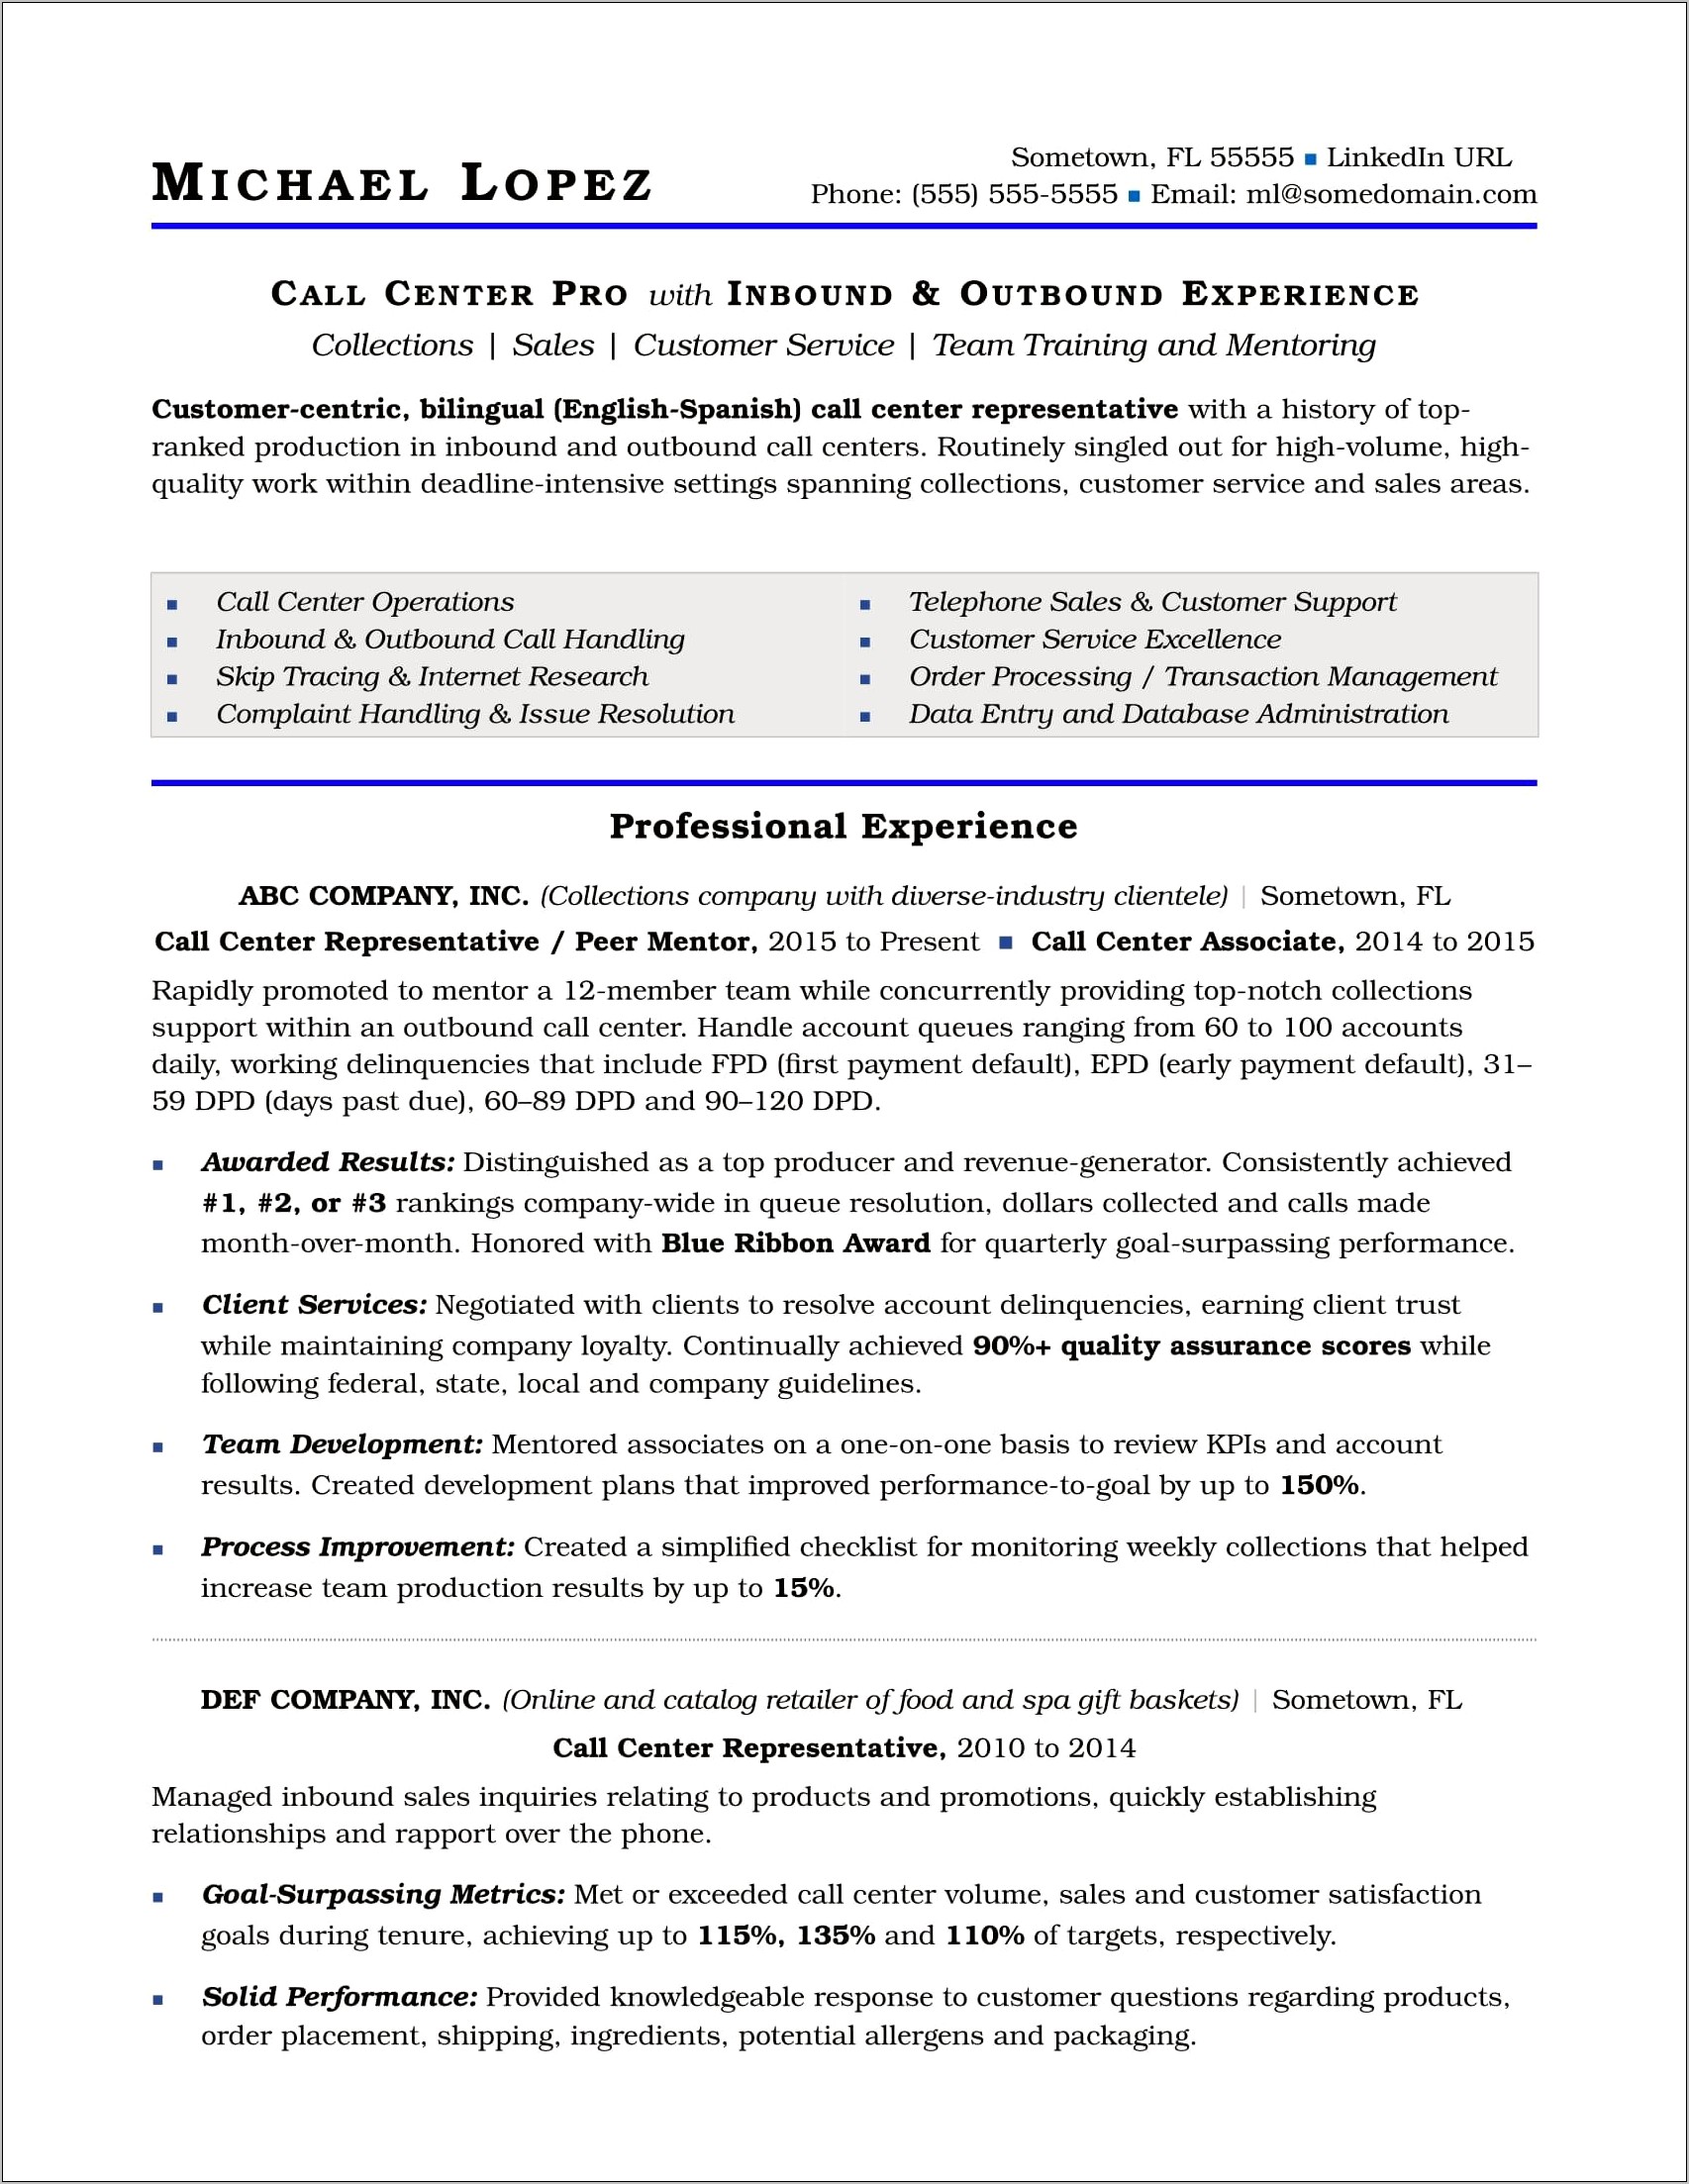 Peer Support Objectives For Resume